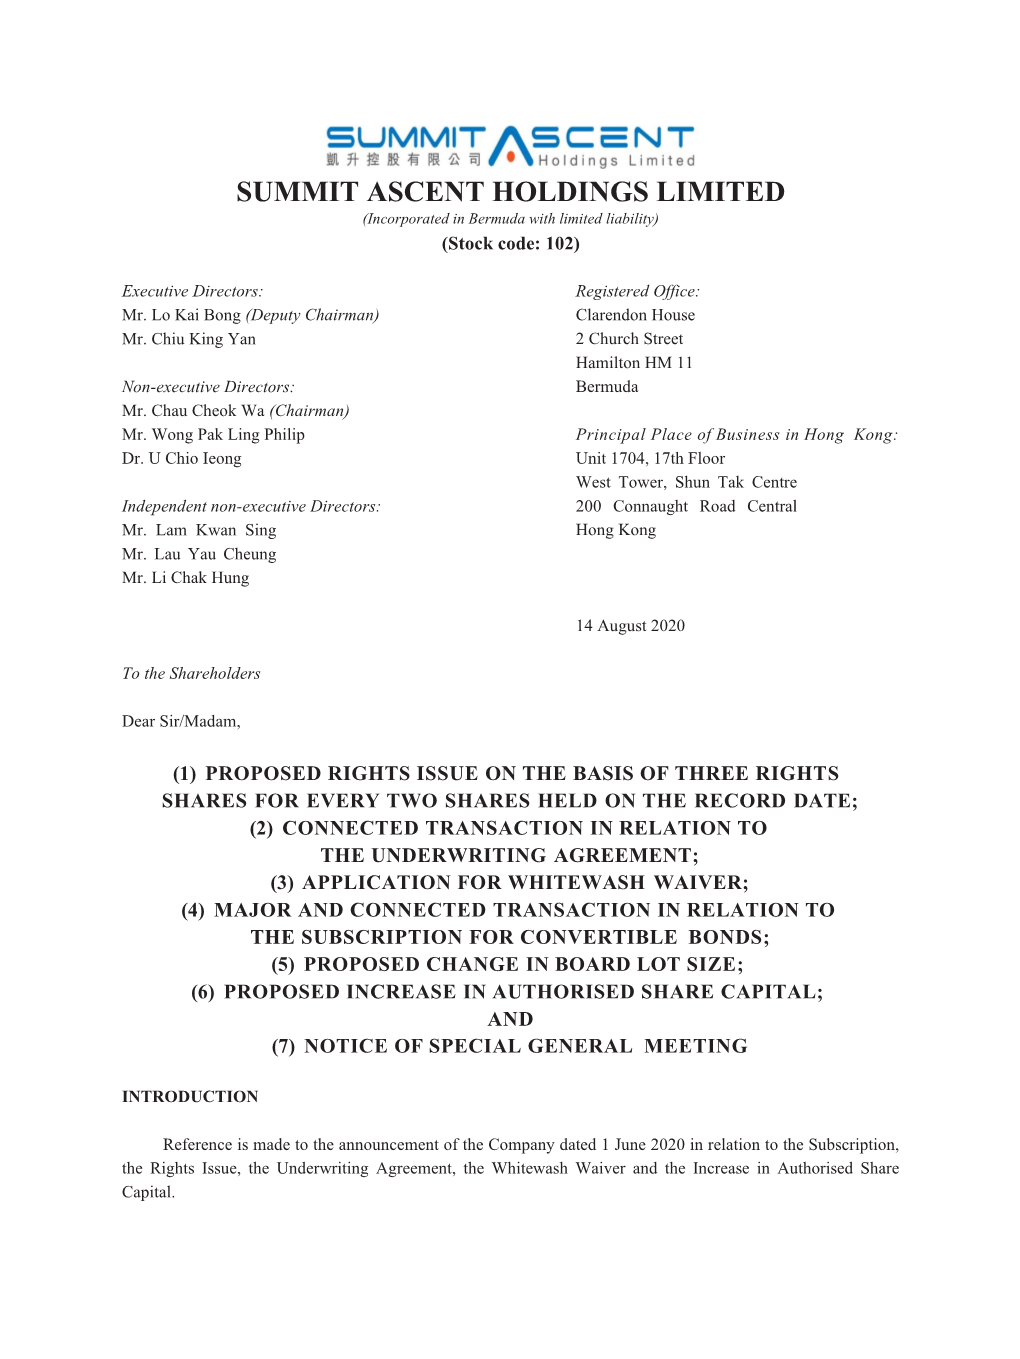 SUMMIT ASCENT HOLDINGS LIMITED (Incorporated in Bermuda with Limited Liability) (Stock Code: 102)